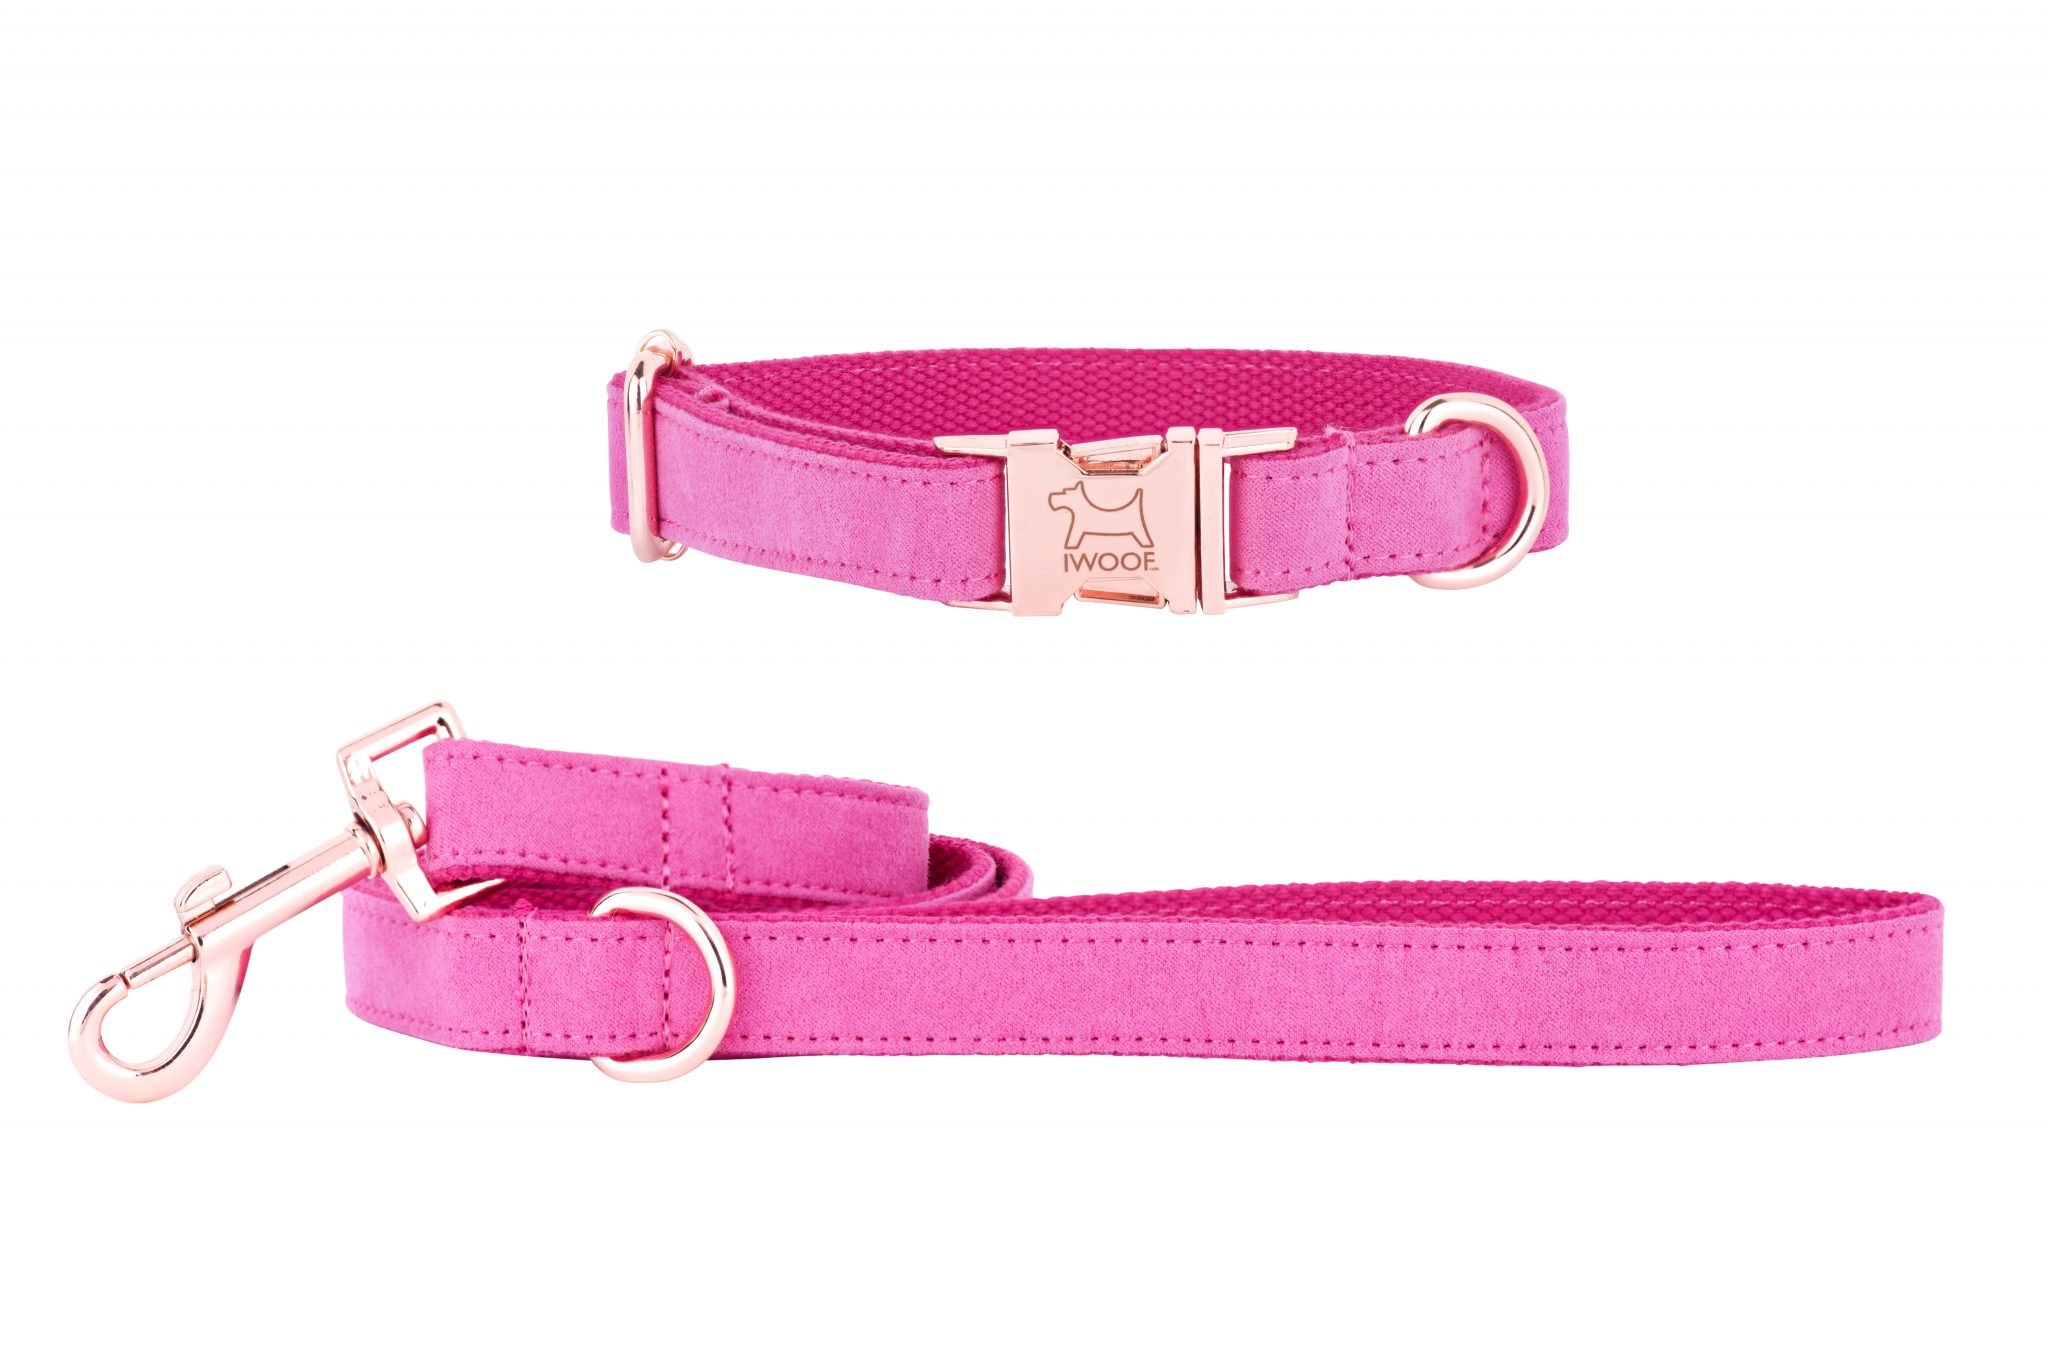 PINK designer dog collar and dog lead set by IWOOF with rose gold fittings